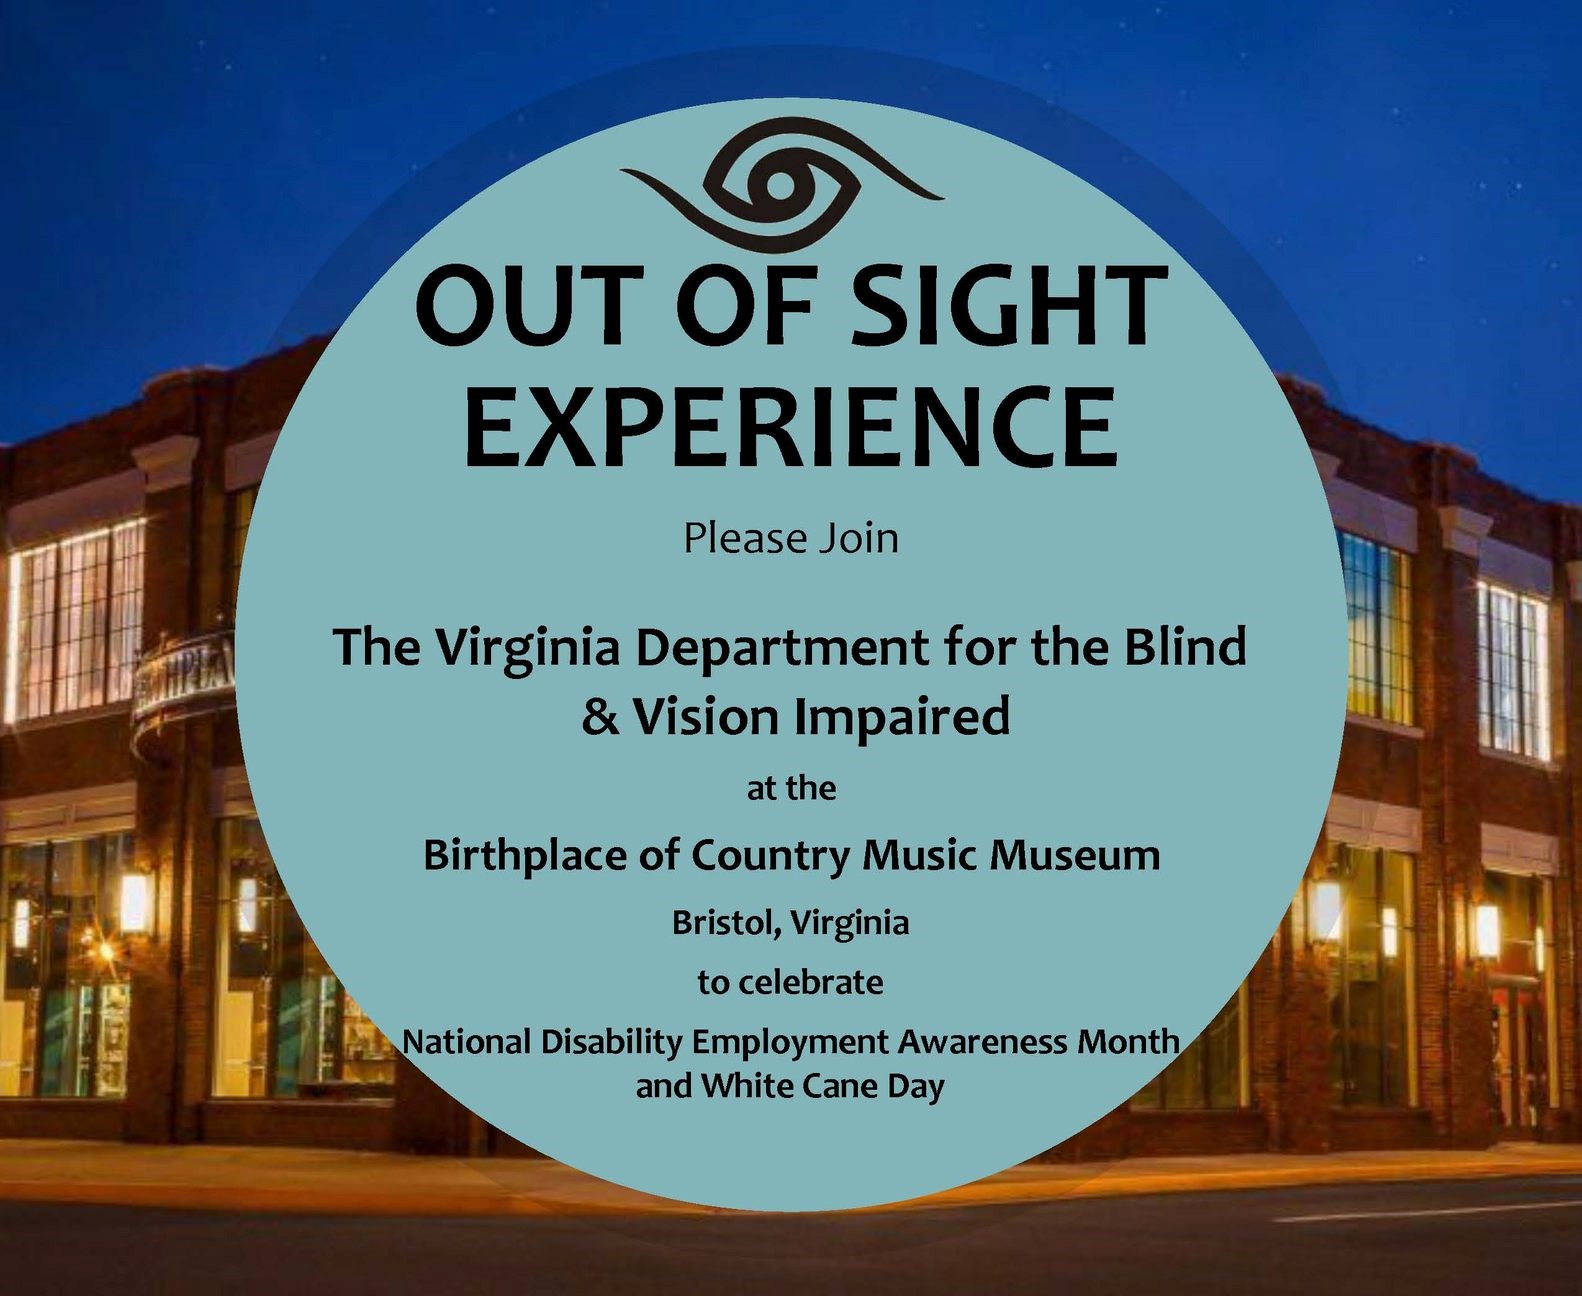 Out of Sight Experience graphic with details of event.